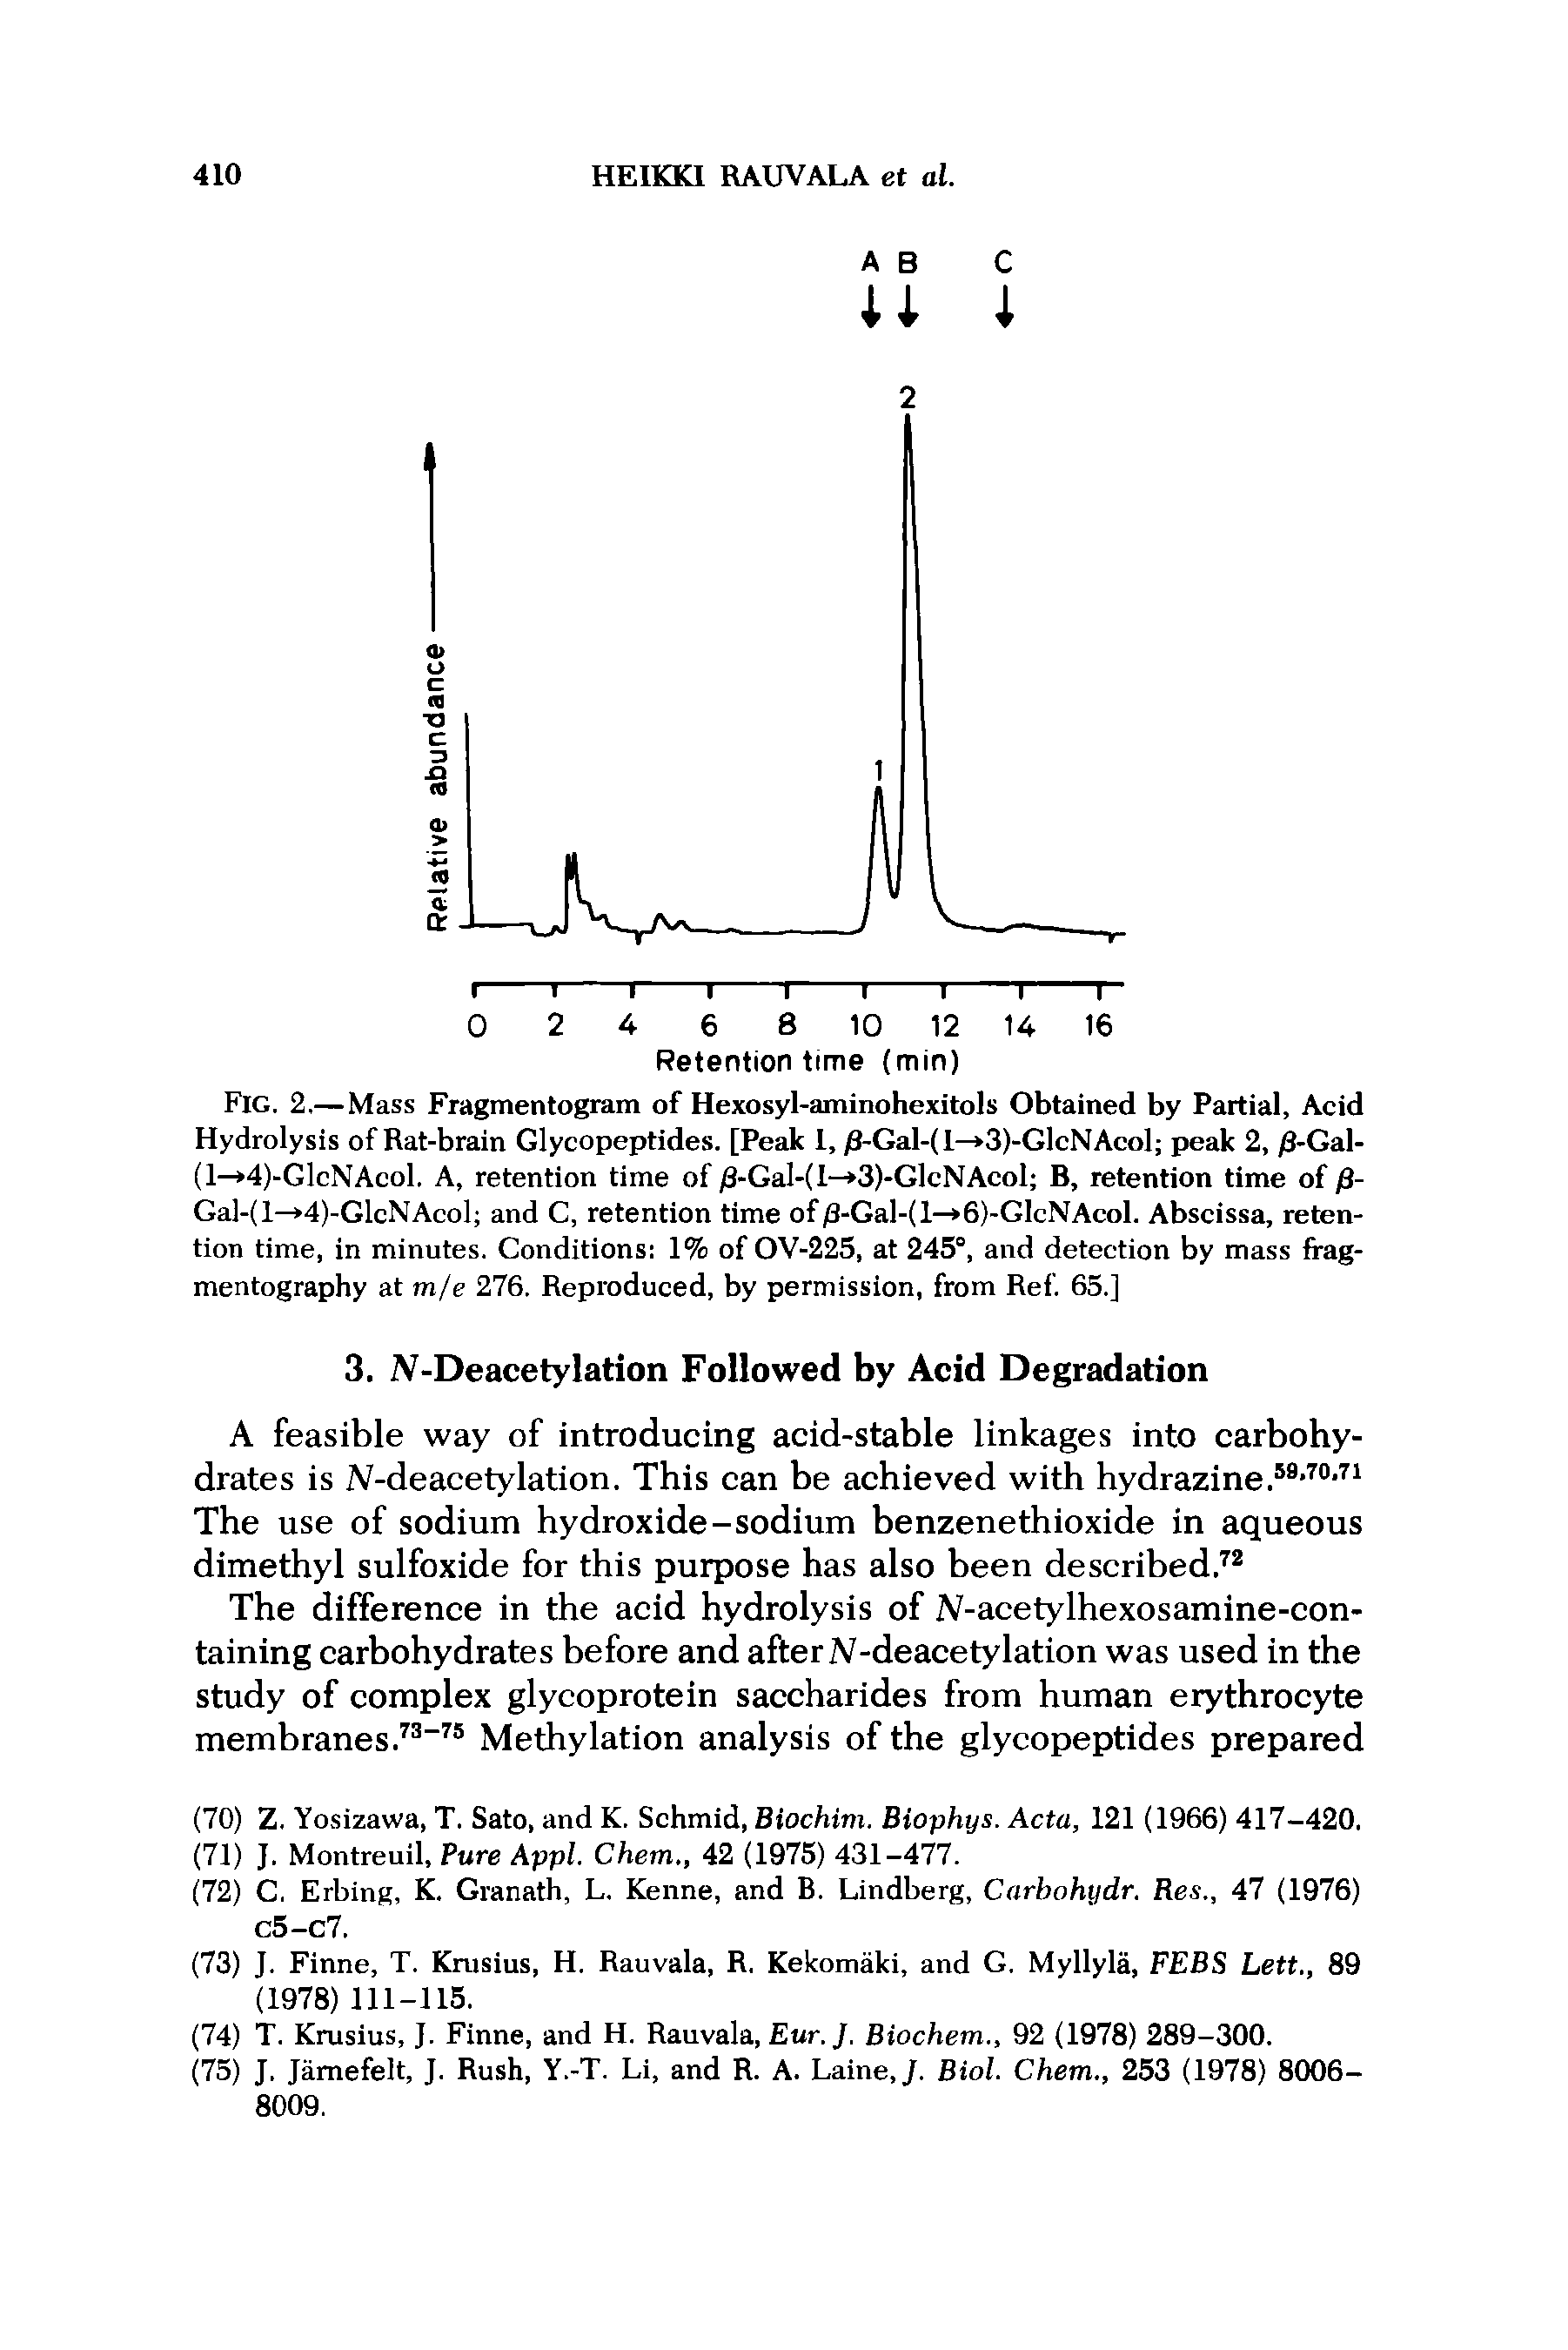 Fig. 2.— Mass Fragmentogram of Hexosyl-aminohexitols Obtained by Partial, Acid Hydrolysis of Rat-brain Glycopeptides. [Peak I, j8-Gal-(l— 3)-GlcNAcol peak 2, /3-Gal-(l- 4)-GlcNAcol. A, retention time of /3-Gal-(l— 3)-GlcNAcol B, retention time of /3-Gal-(1—>4)-GlcNAcol and C, retention time of/3-Gal-(l— 6)-GlcNAcol. Abscissa, retention time, in minutes. Conditions 1% of OV-225, at 245°, and detection by mass frag-mentography at m/e 276. Reproduced, by permission, from Ref. 65.]...